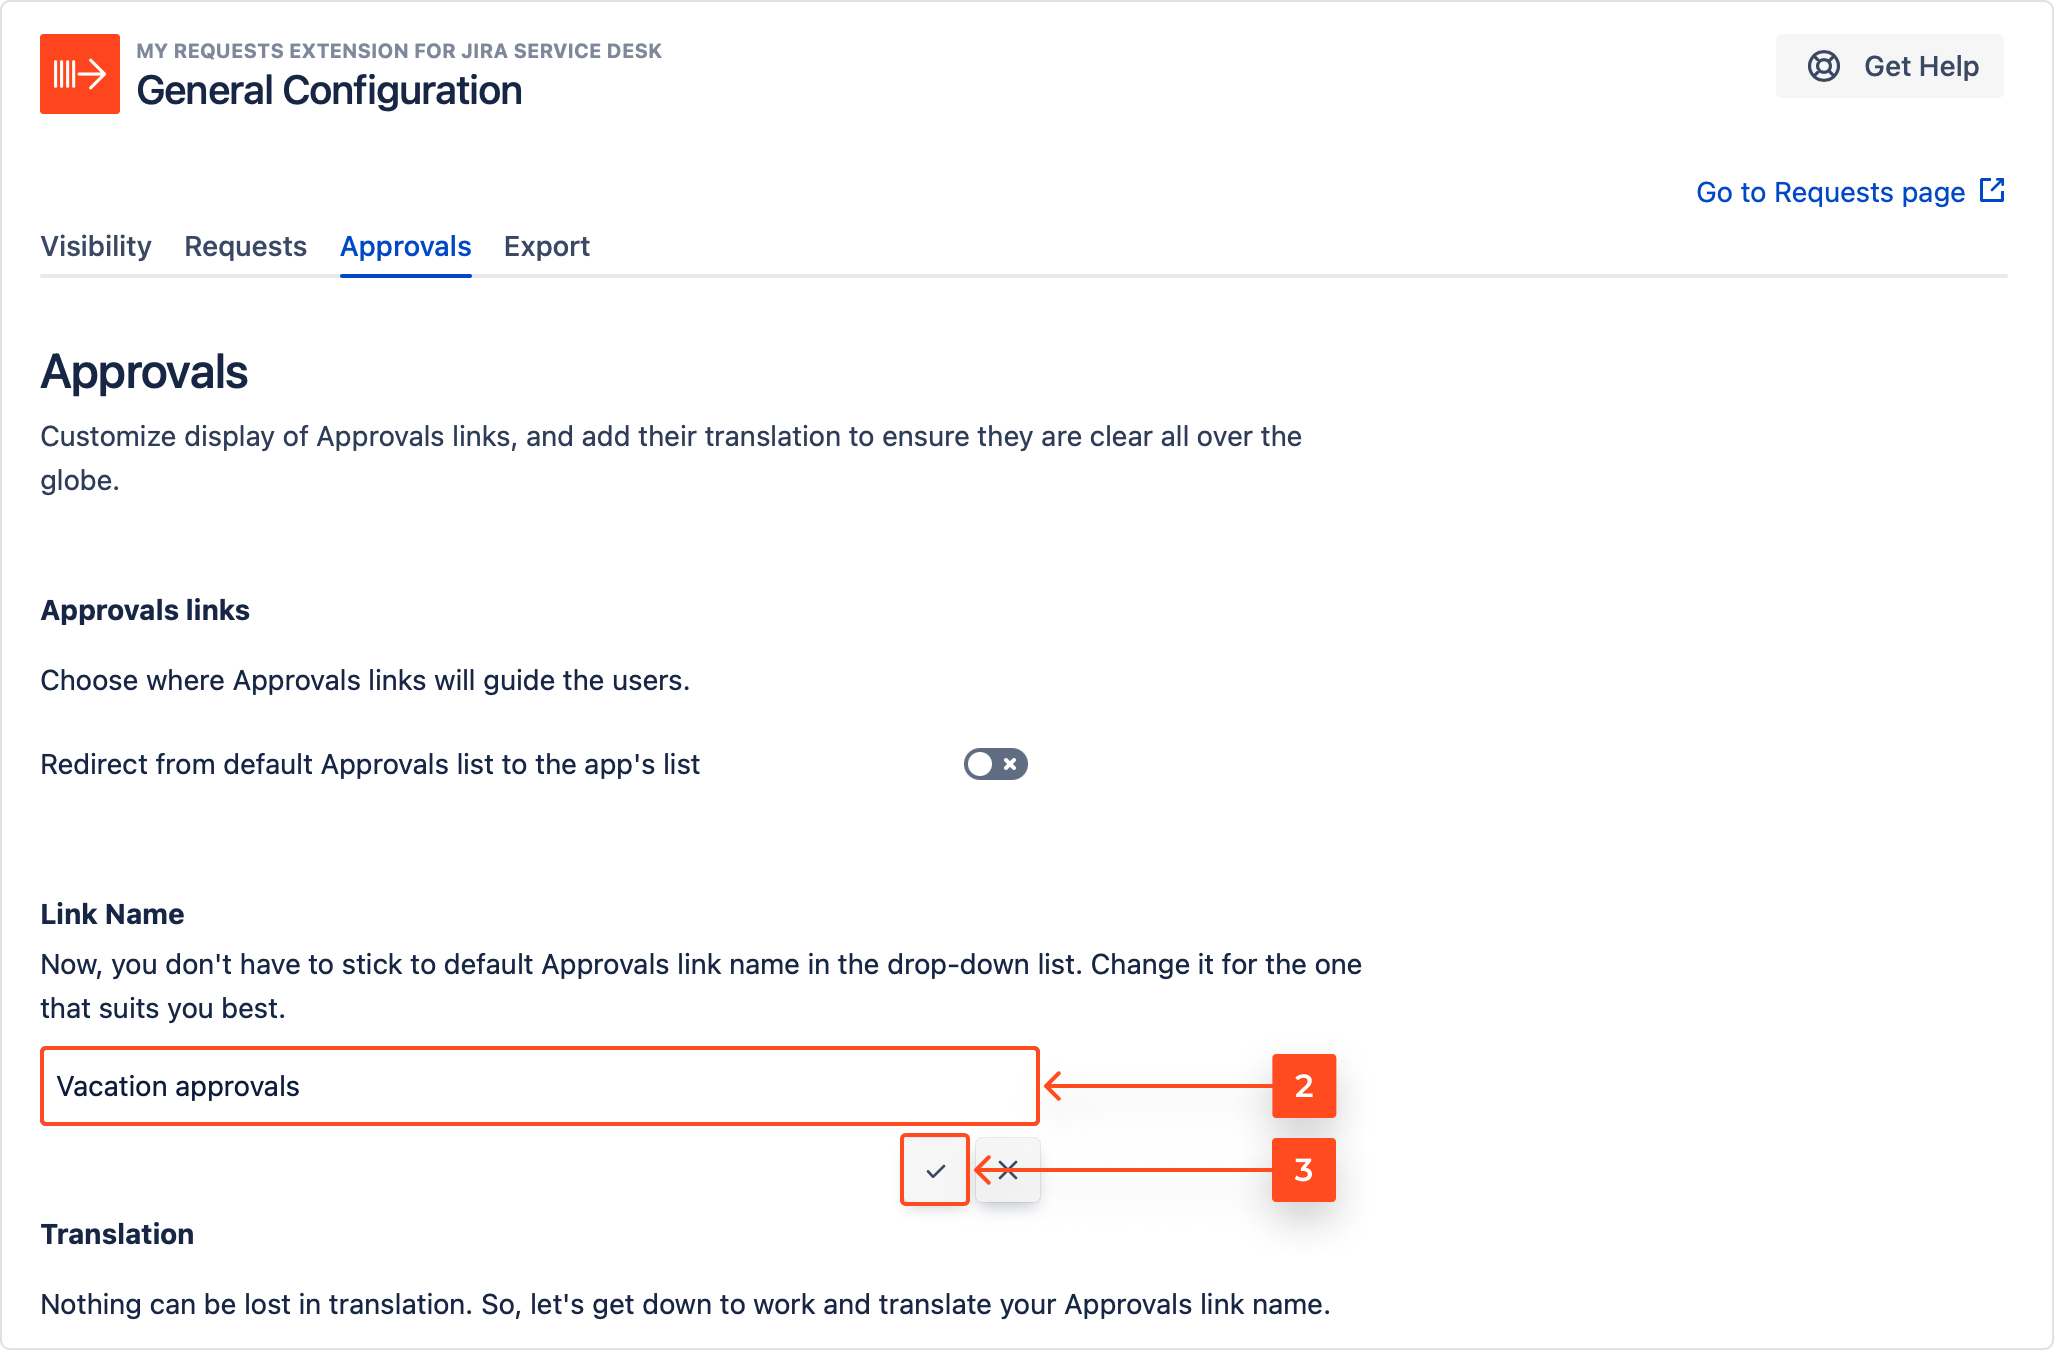 Customize My Requests Extension Jira Service Management